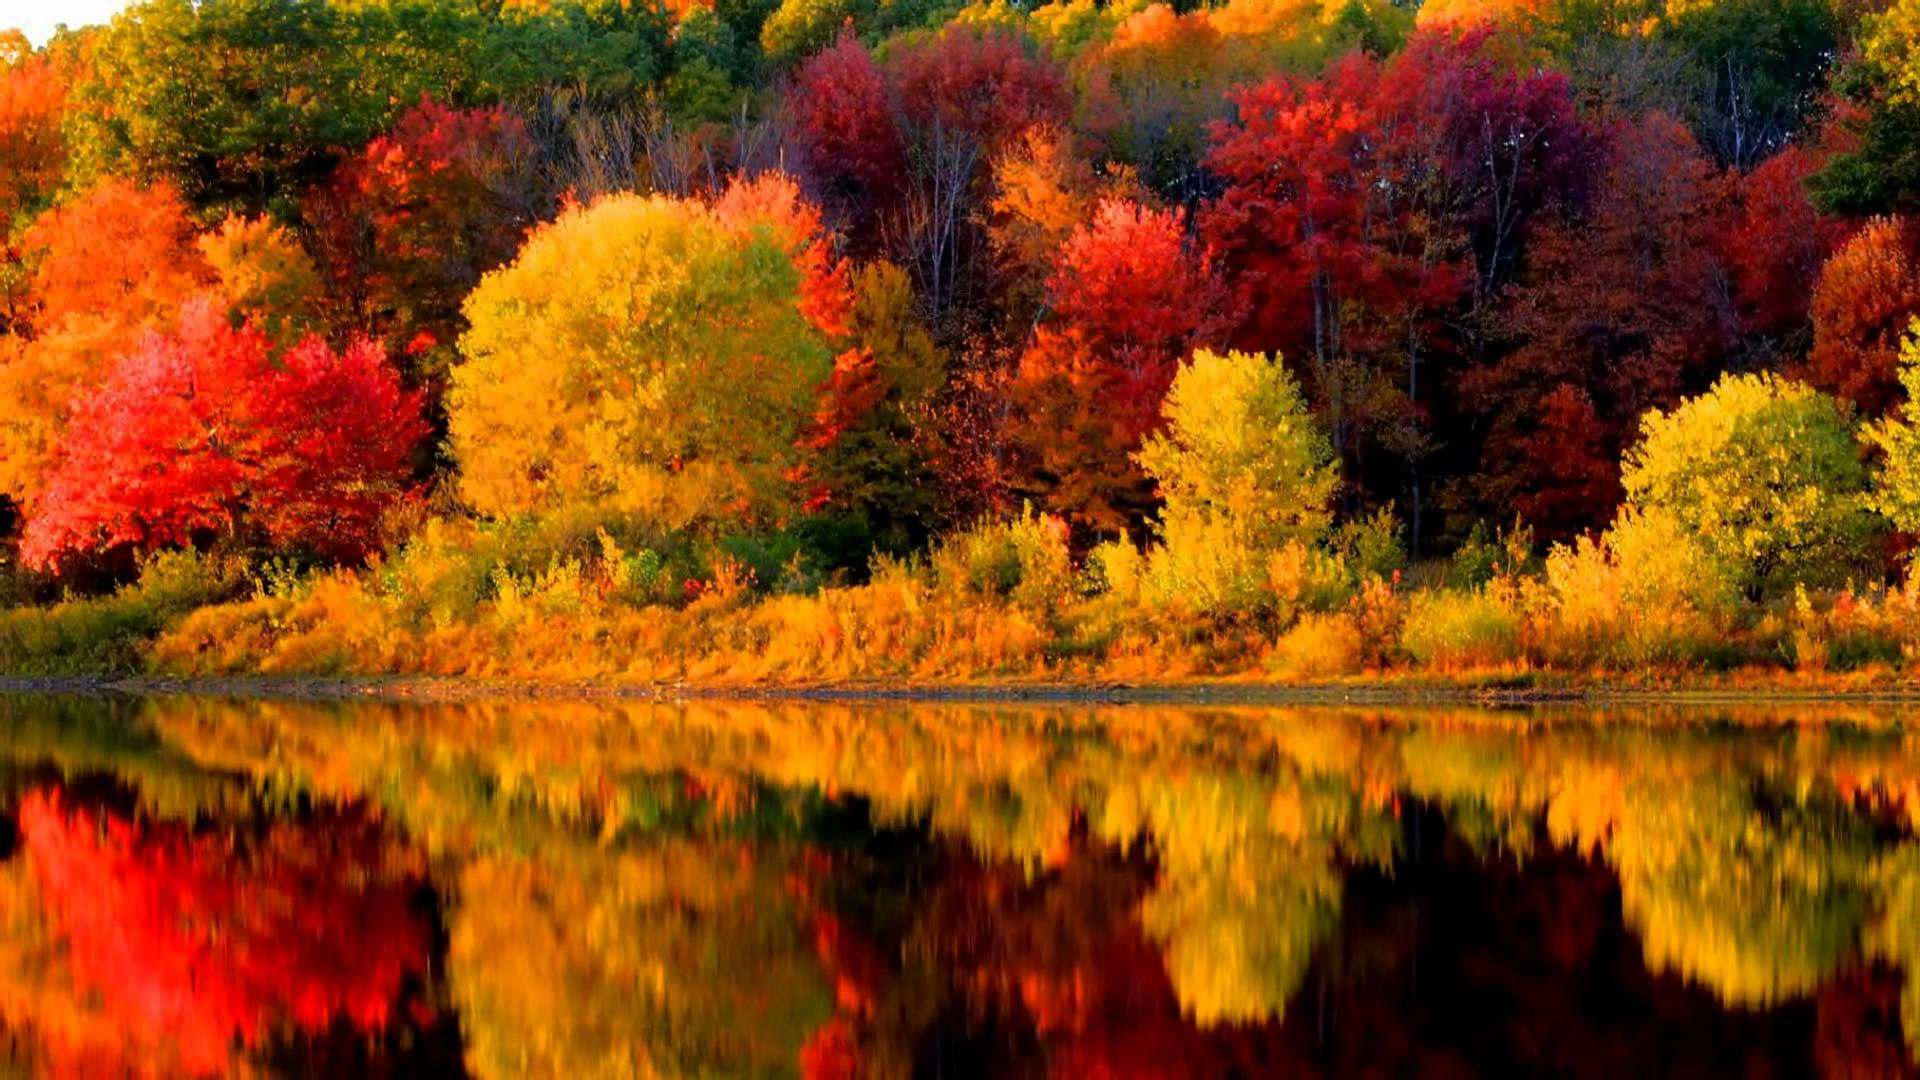 Autumn in New England (Music by Vivaldi) - YouTube